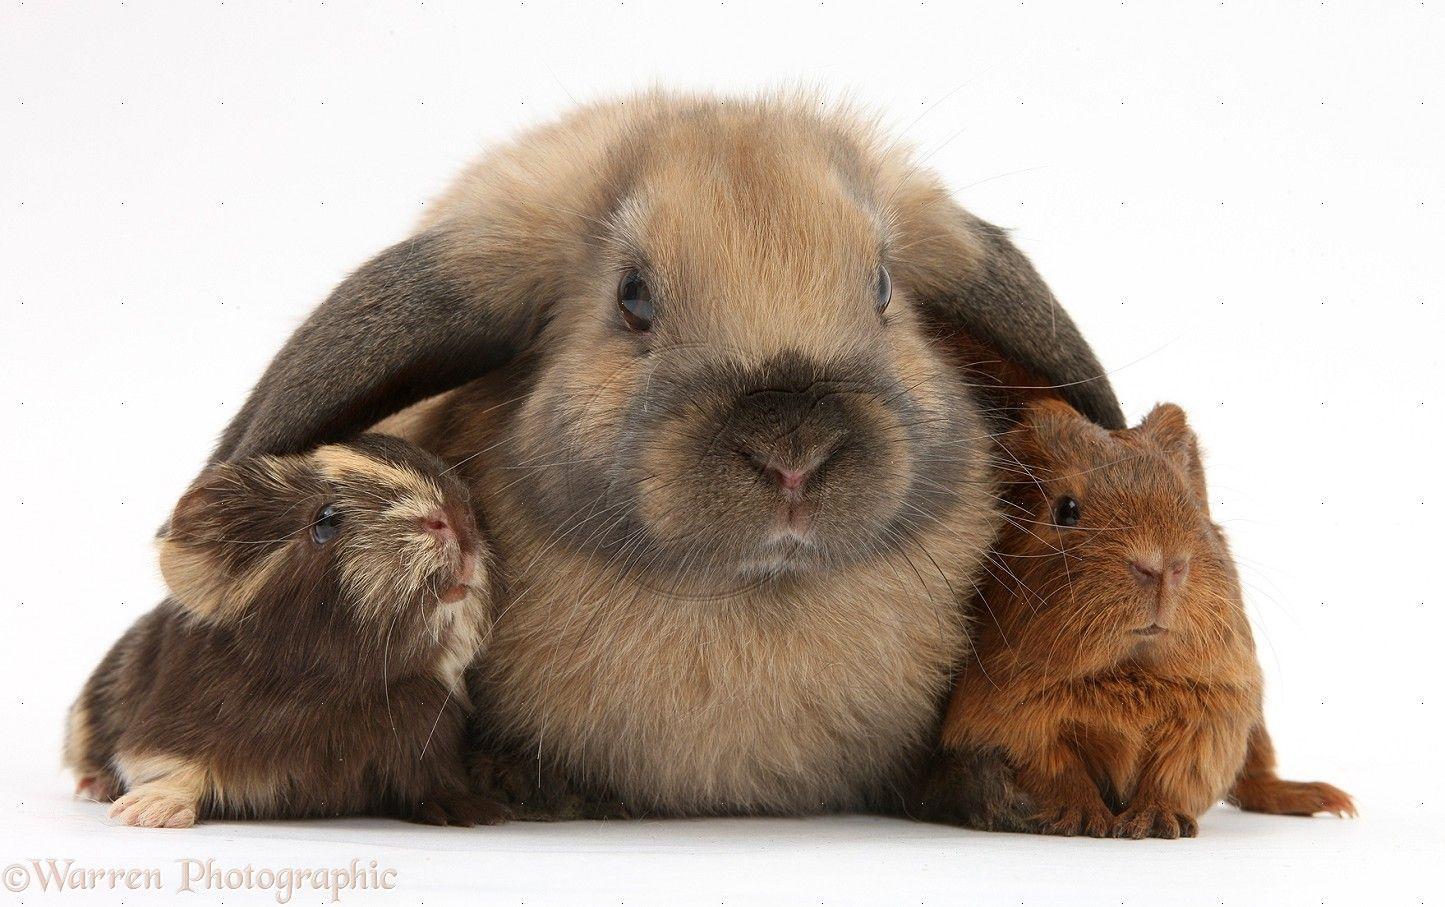 Rabbit and Baby Guinea Pig HD Wallpaper. Guinea Pig